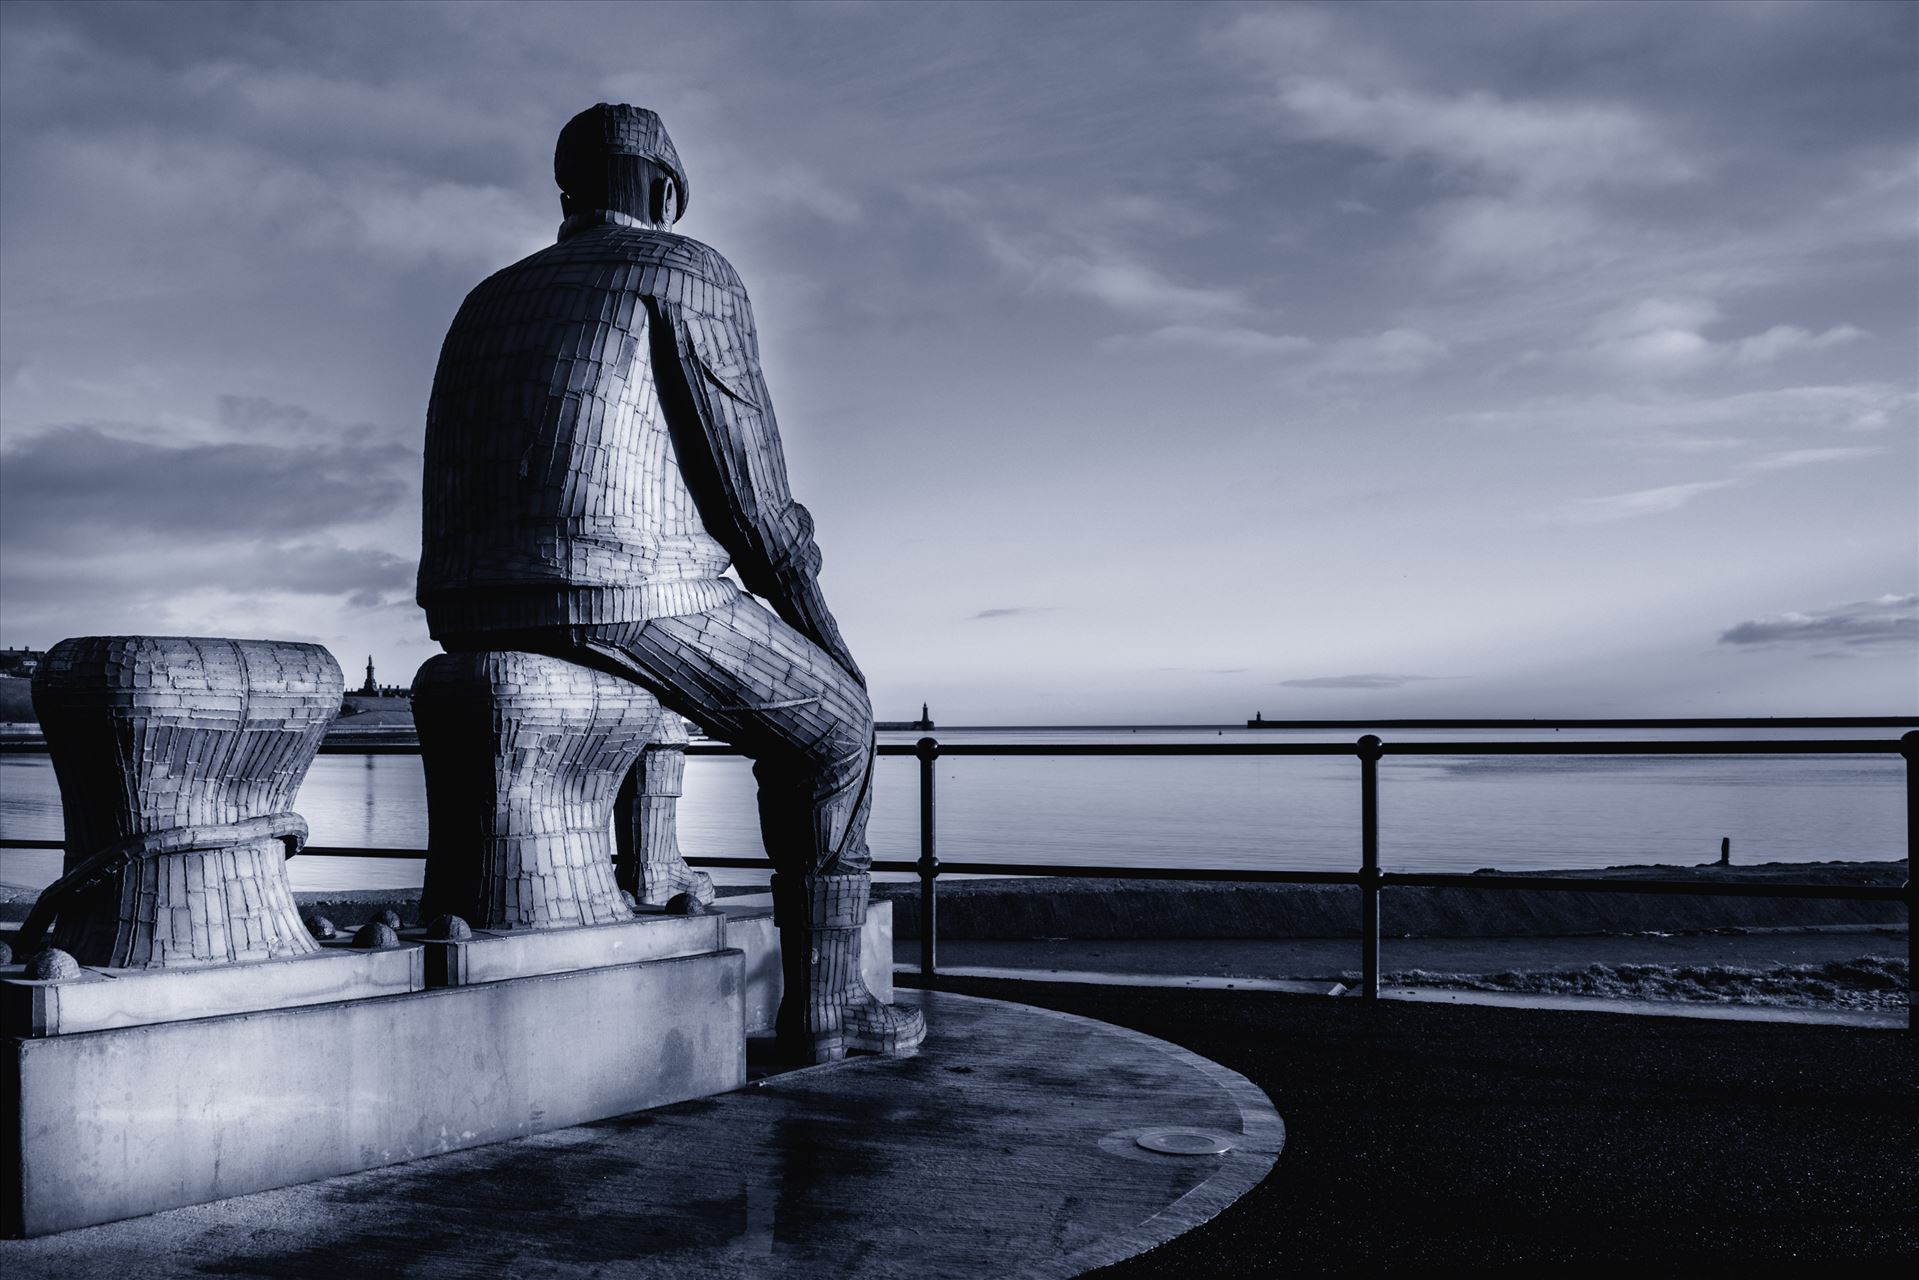 Fiddlers Green - The impressive sculpture,  by local artist Ray Lonsdale, named Fiddler’s Green, stands 10ft 6ins tall and is located near the fish quay in North Shields. The memorial is in honour of those fishermen who died doing their job after leaving the port. by philreay